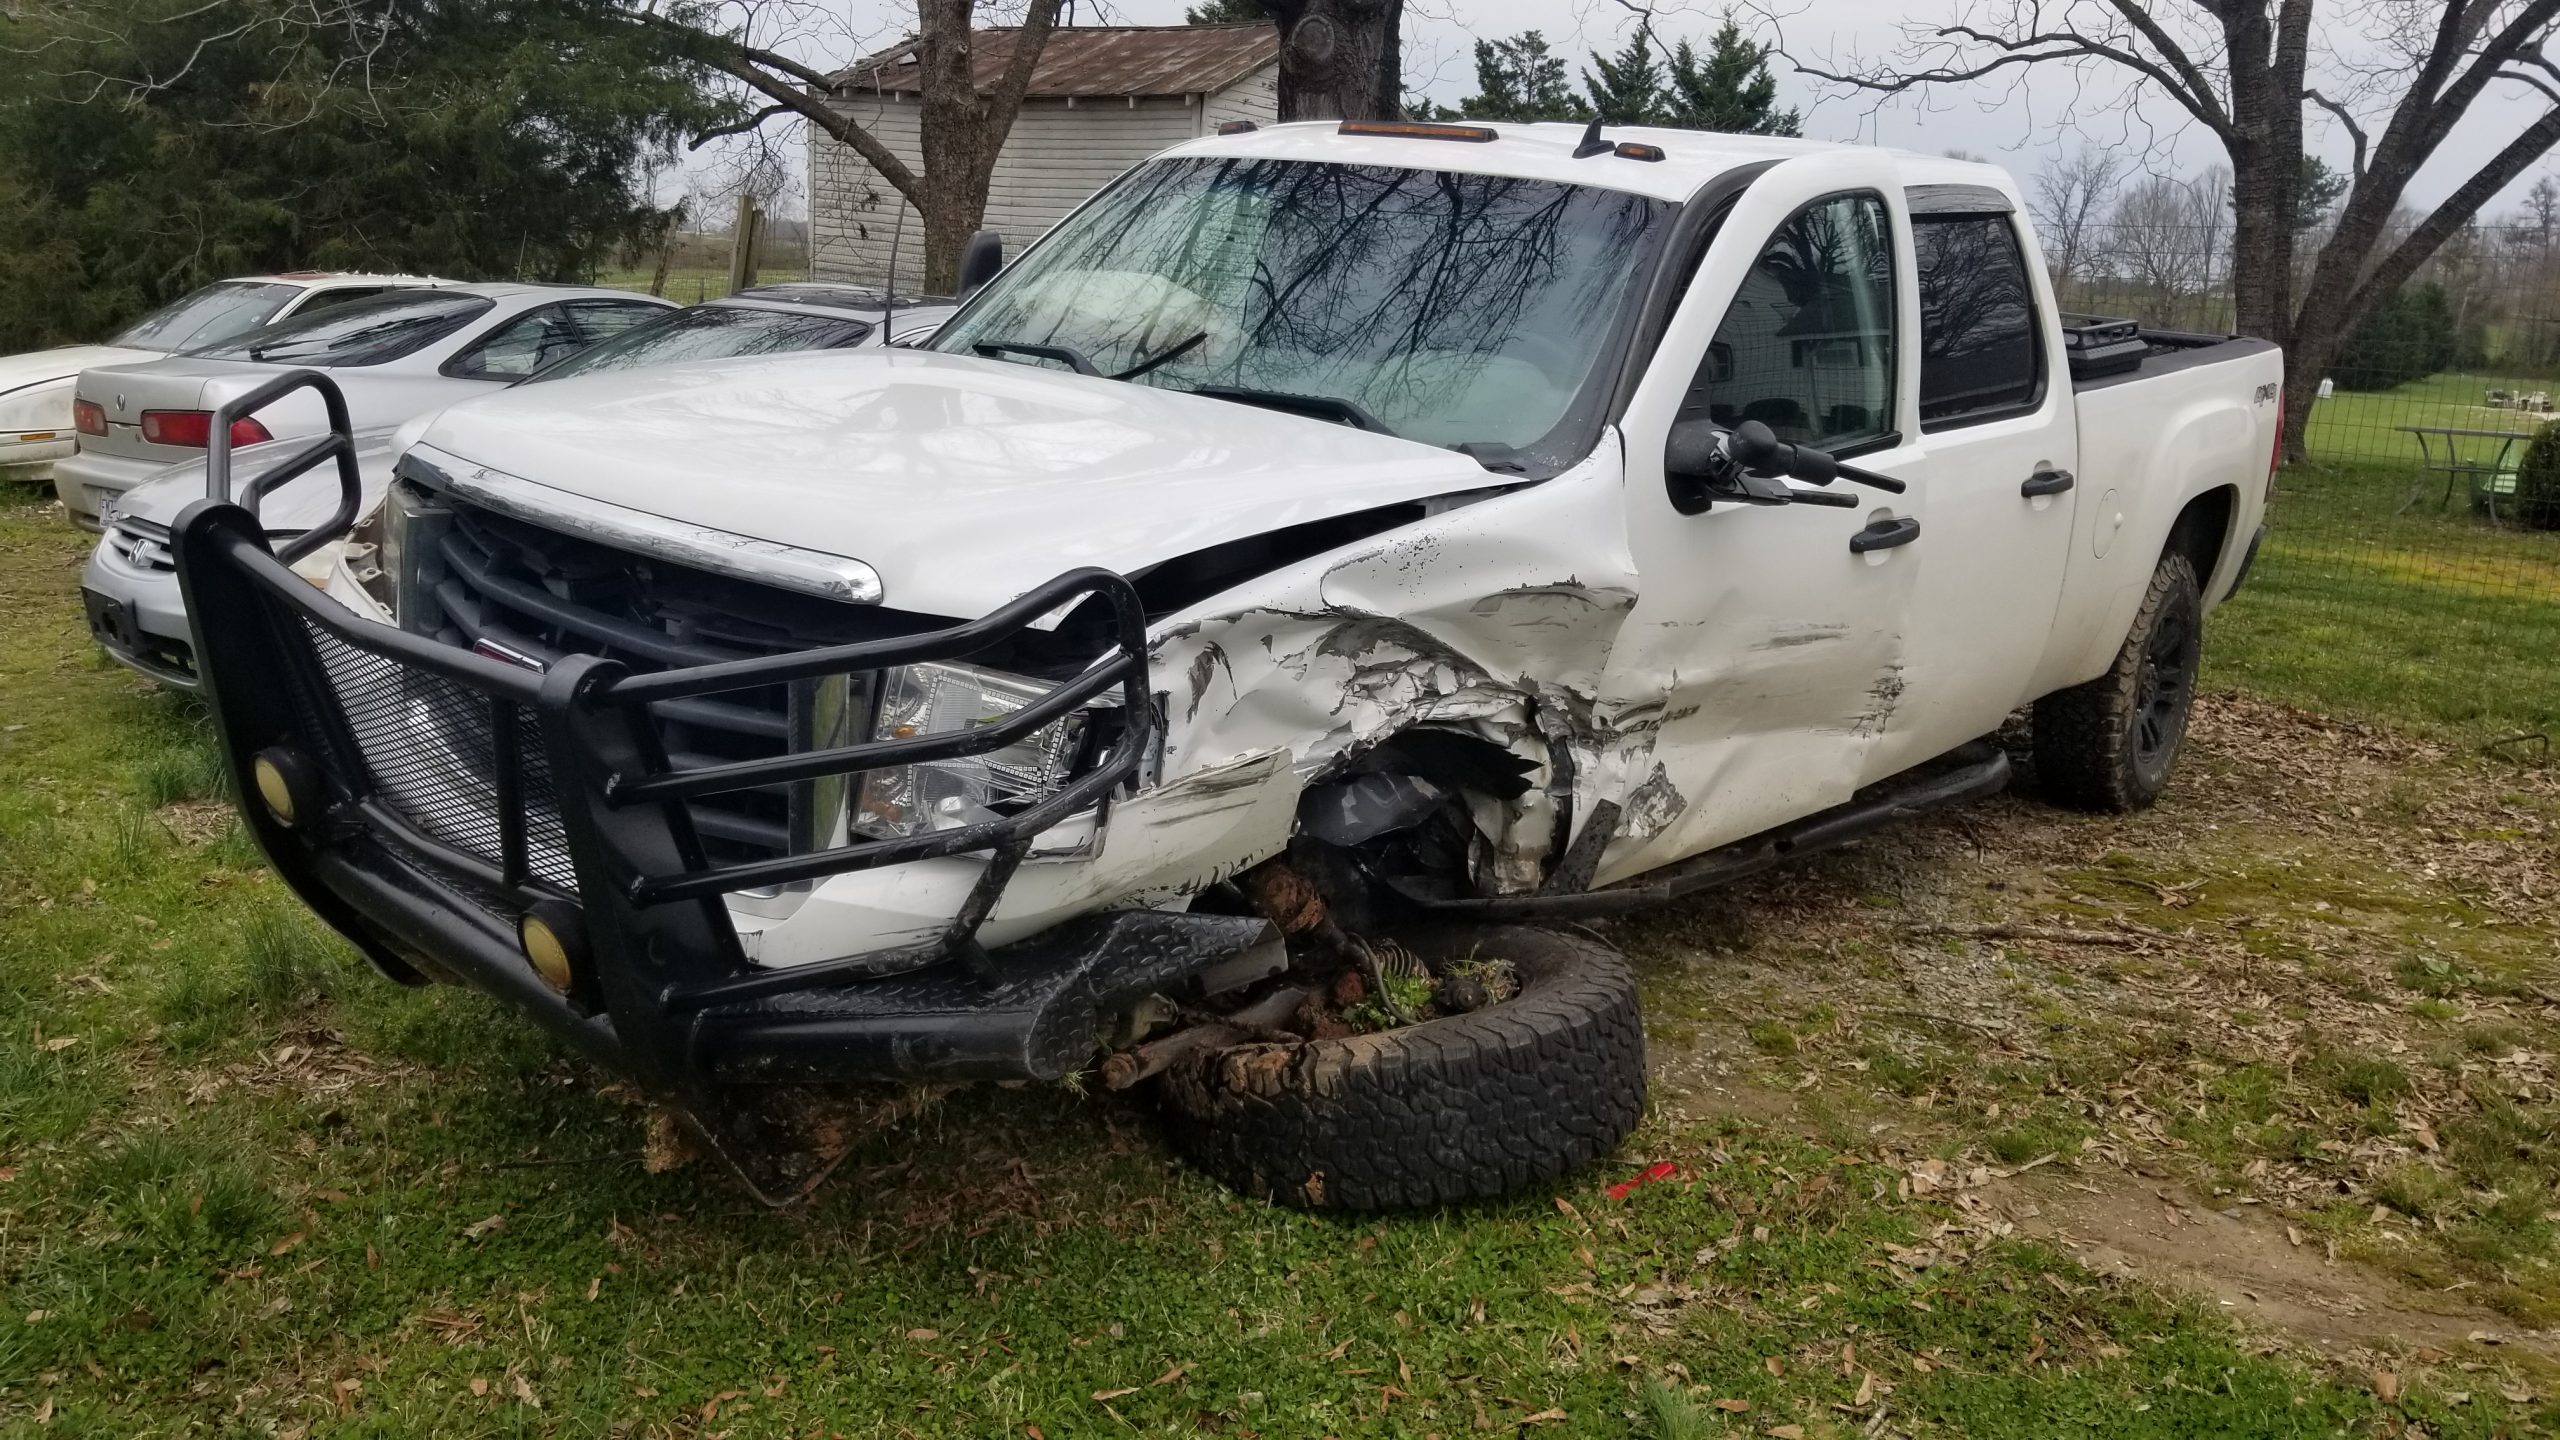 I Truly Believe God and the Ranch Hand Bumper Allowed Me To Walk Away From This